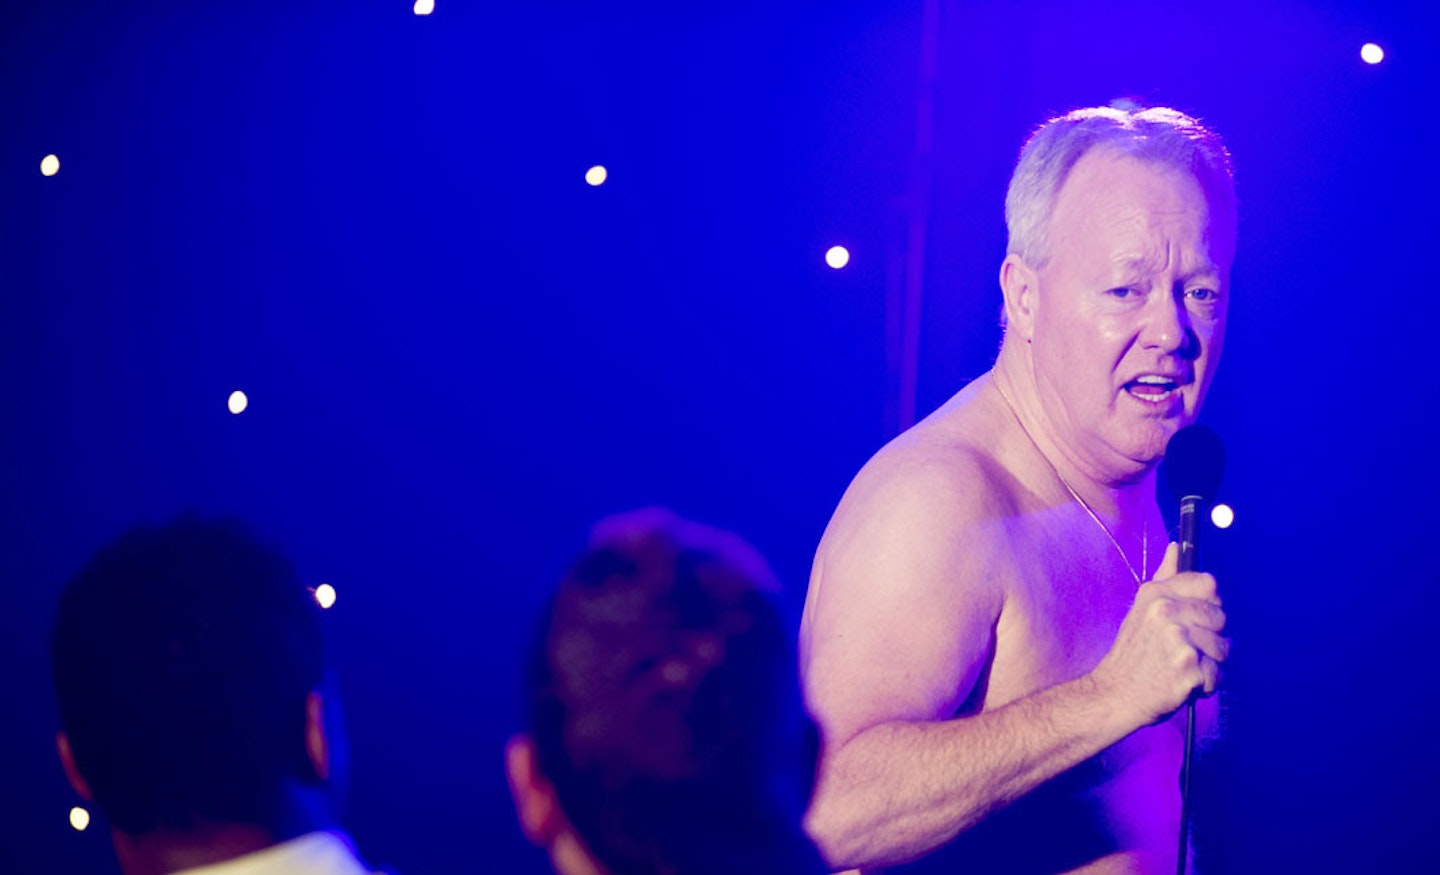 Keith Chegwin getting his kit off again